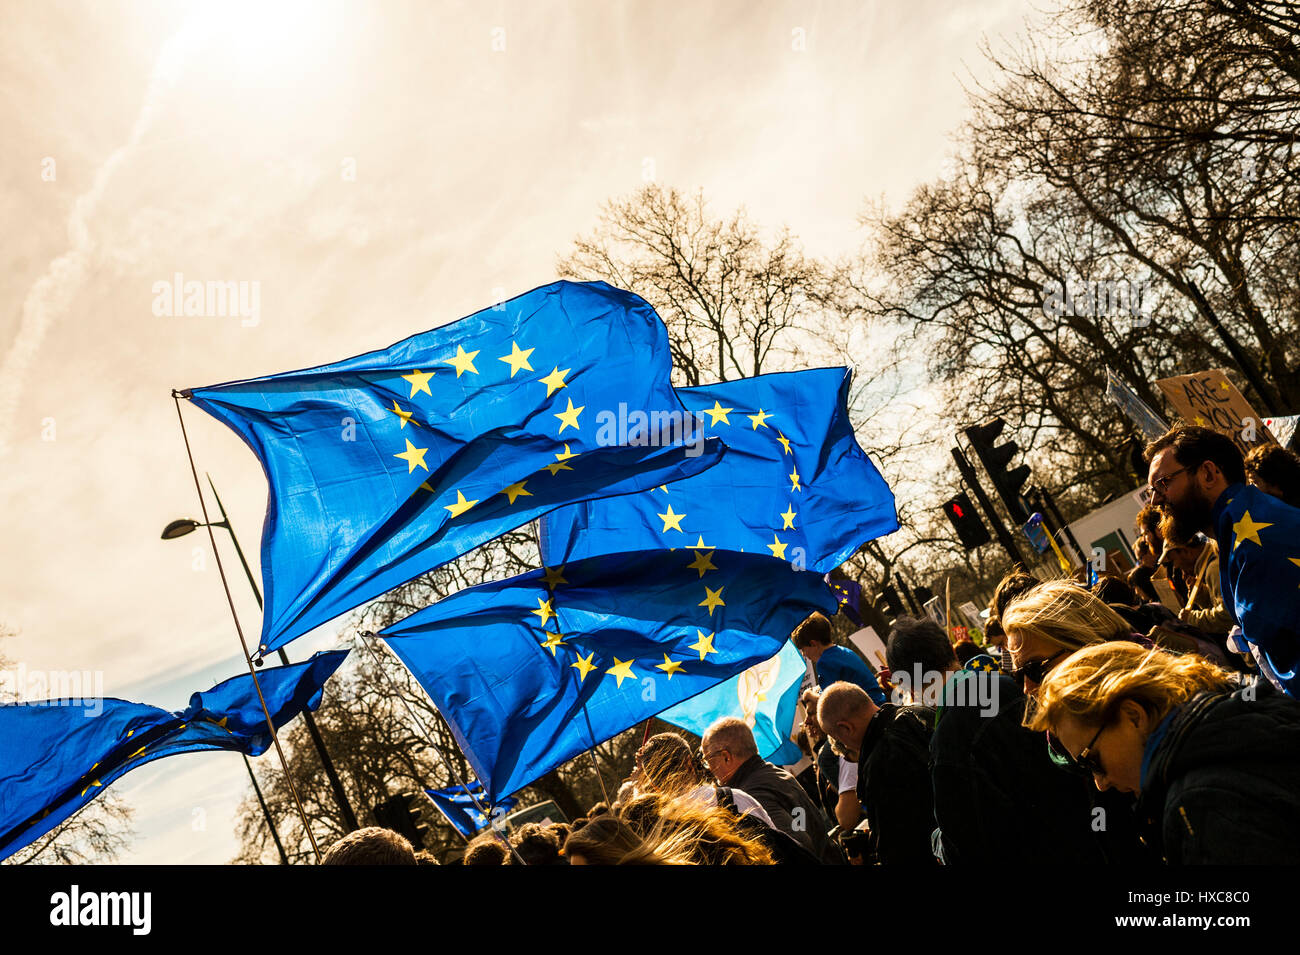 The March for Europe in London on Saturday 25th March 2017. Demo from Hyde Park to Parliament Square. Organized by the movement Unite for Europe. Stock Photo